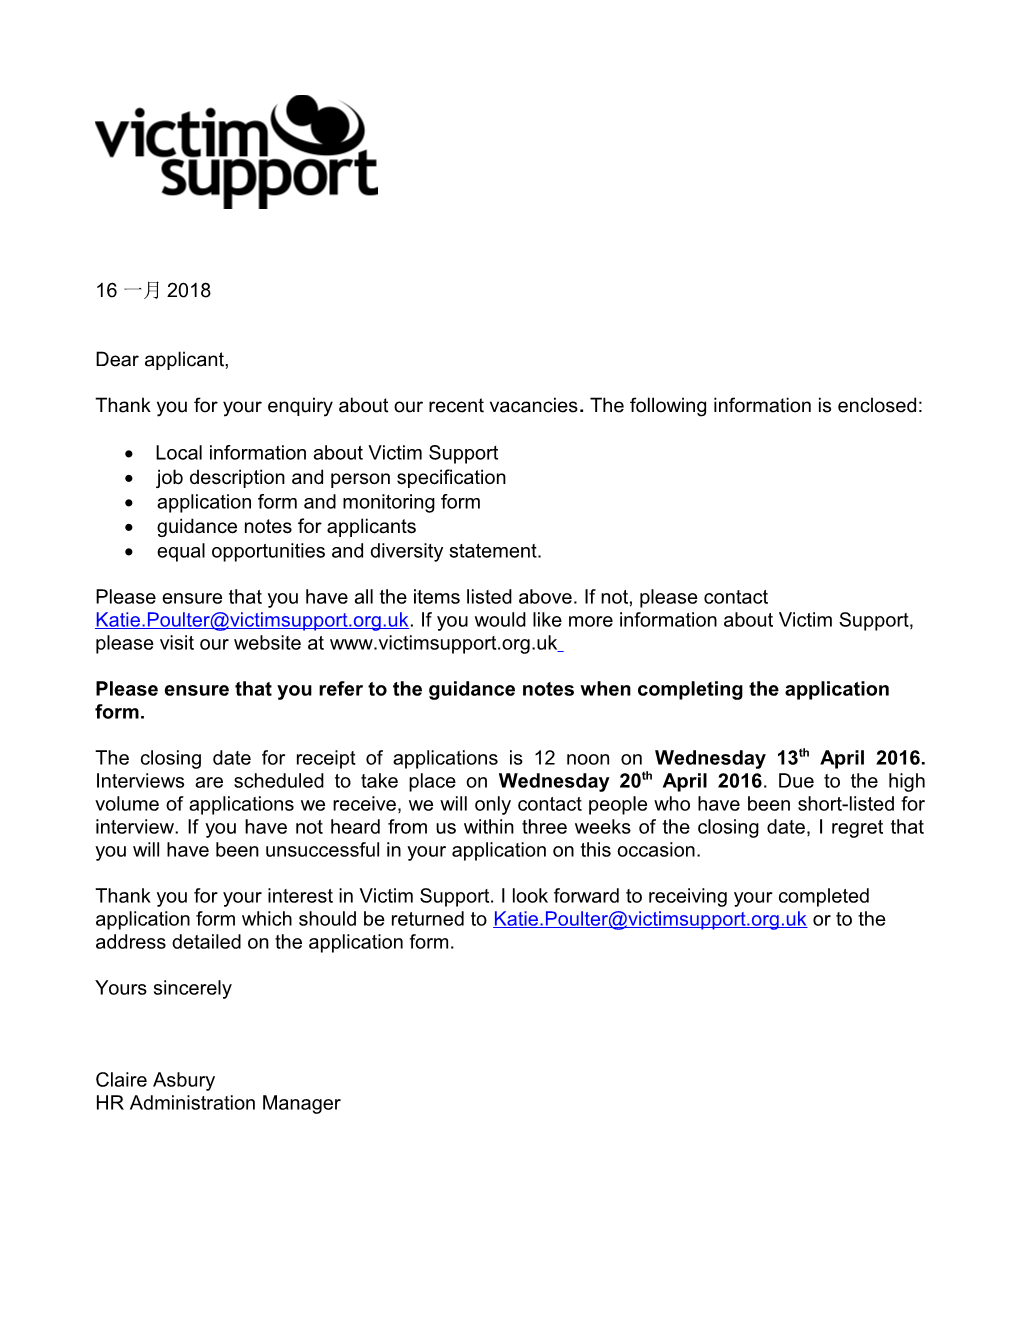 Thank You for Your Enquiry About Our Recent Vacancies. the Following Information Is Enclosed